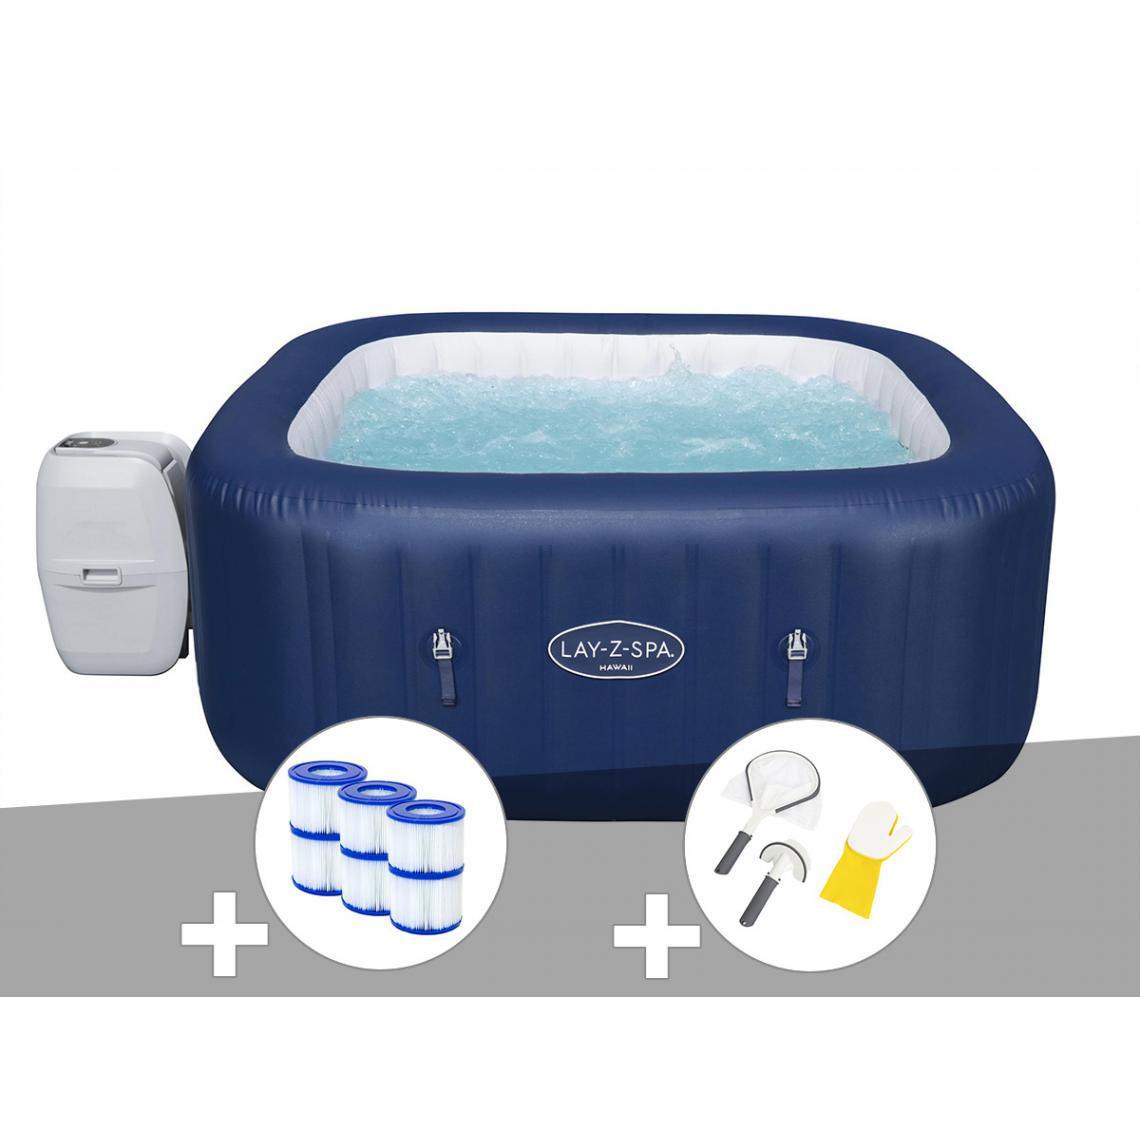 Bestway - Kit spa gonflable Bestway Lay-Z-Spa Hawaii carré Airjet 4/6 places + 6 filtres + Kit de nettoyage - Spa gonflable